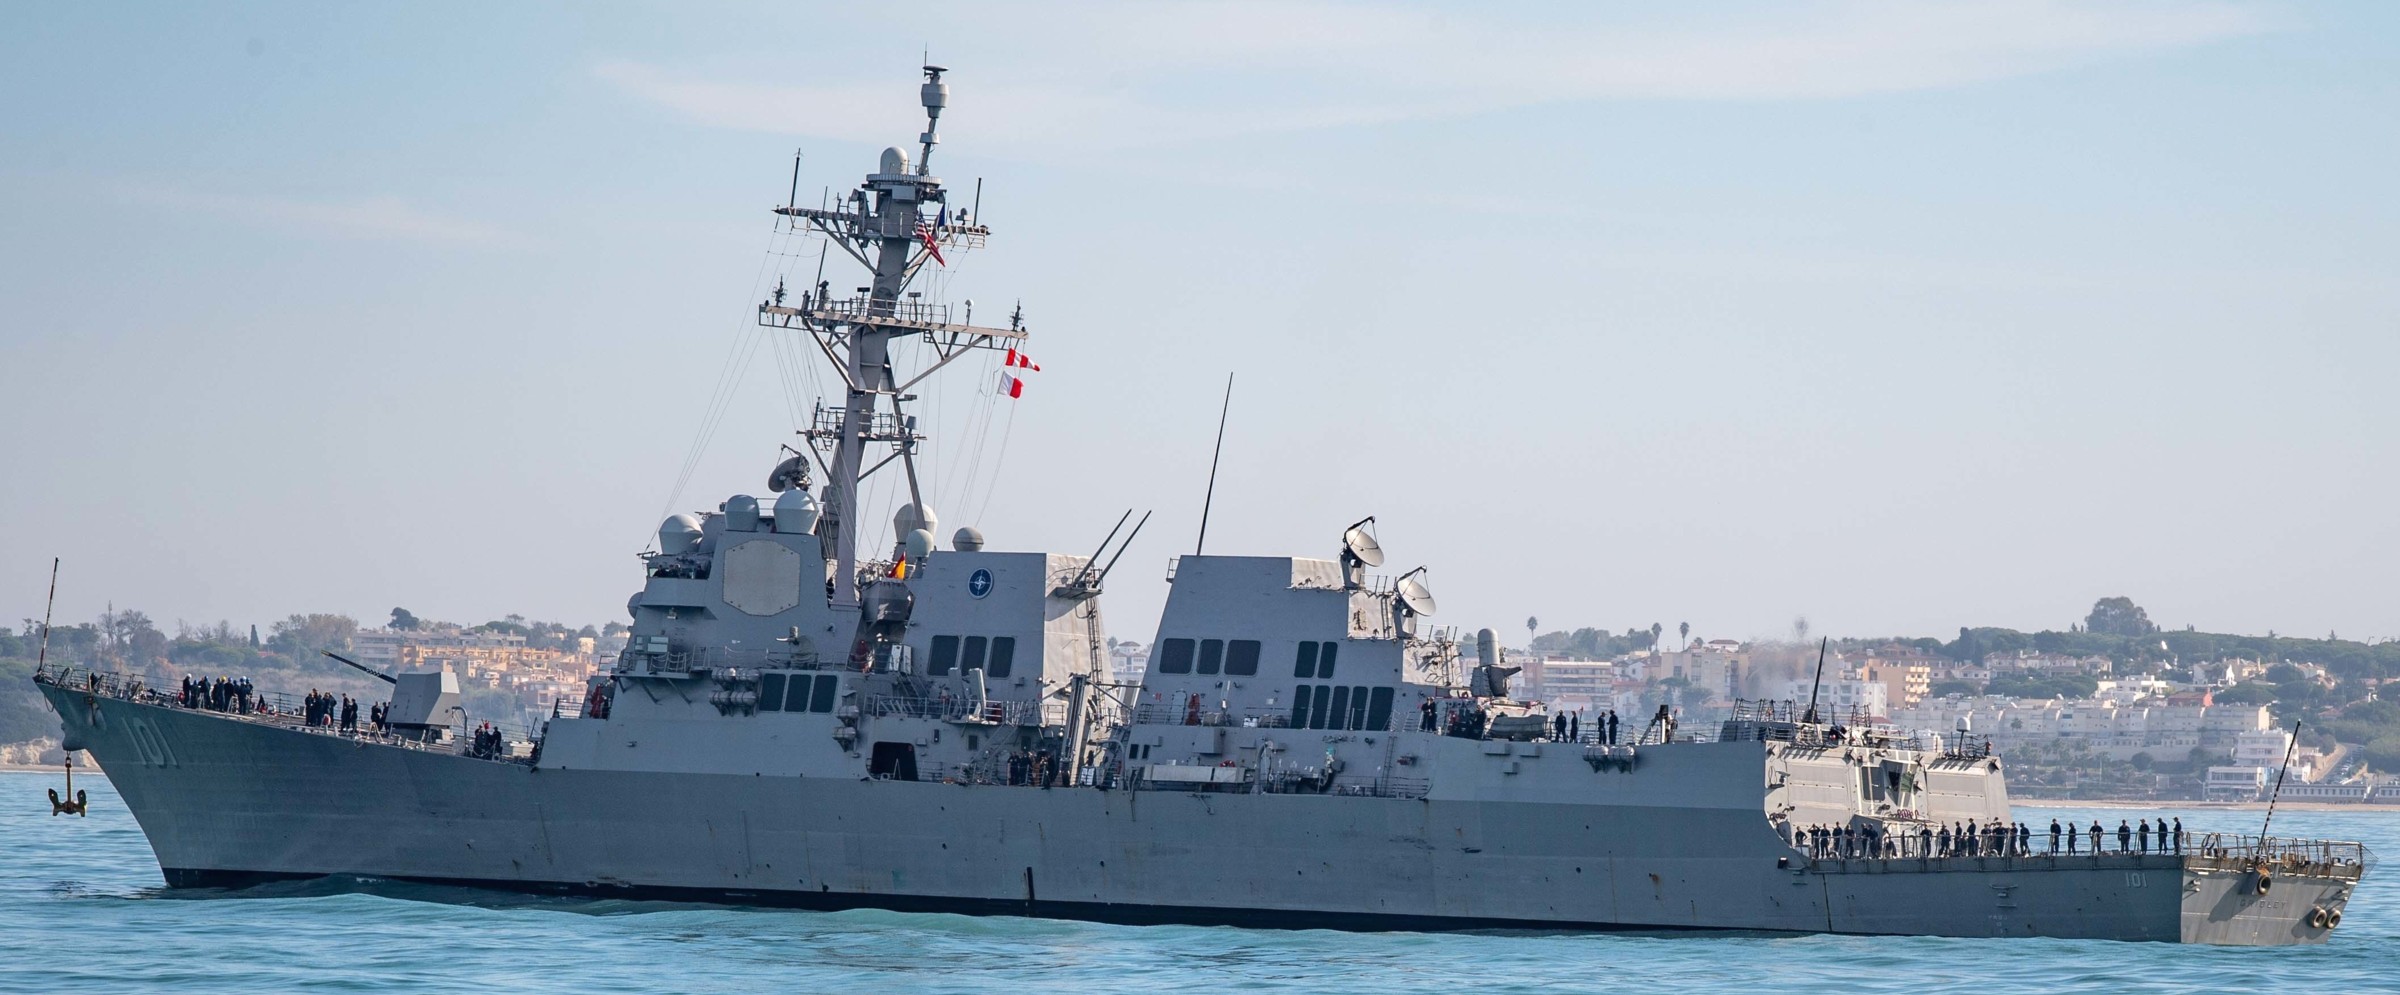 ddg-101 uss gridley arleigh burke class guided missile destroyer aegis us navy naval station rota spain 64